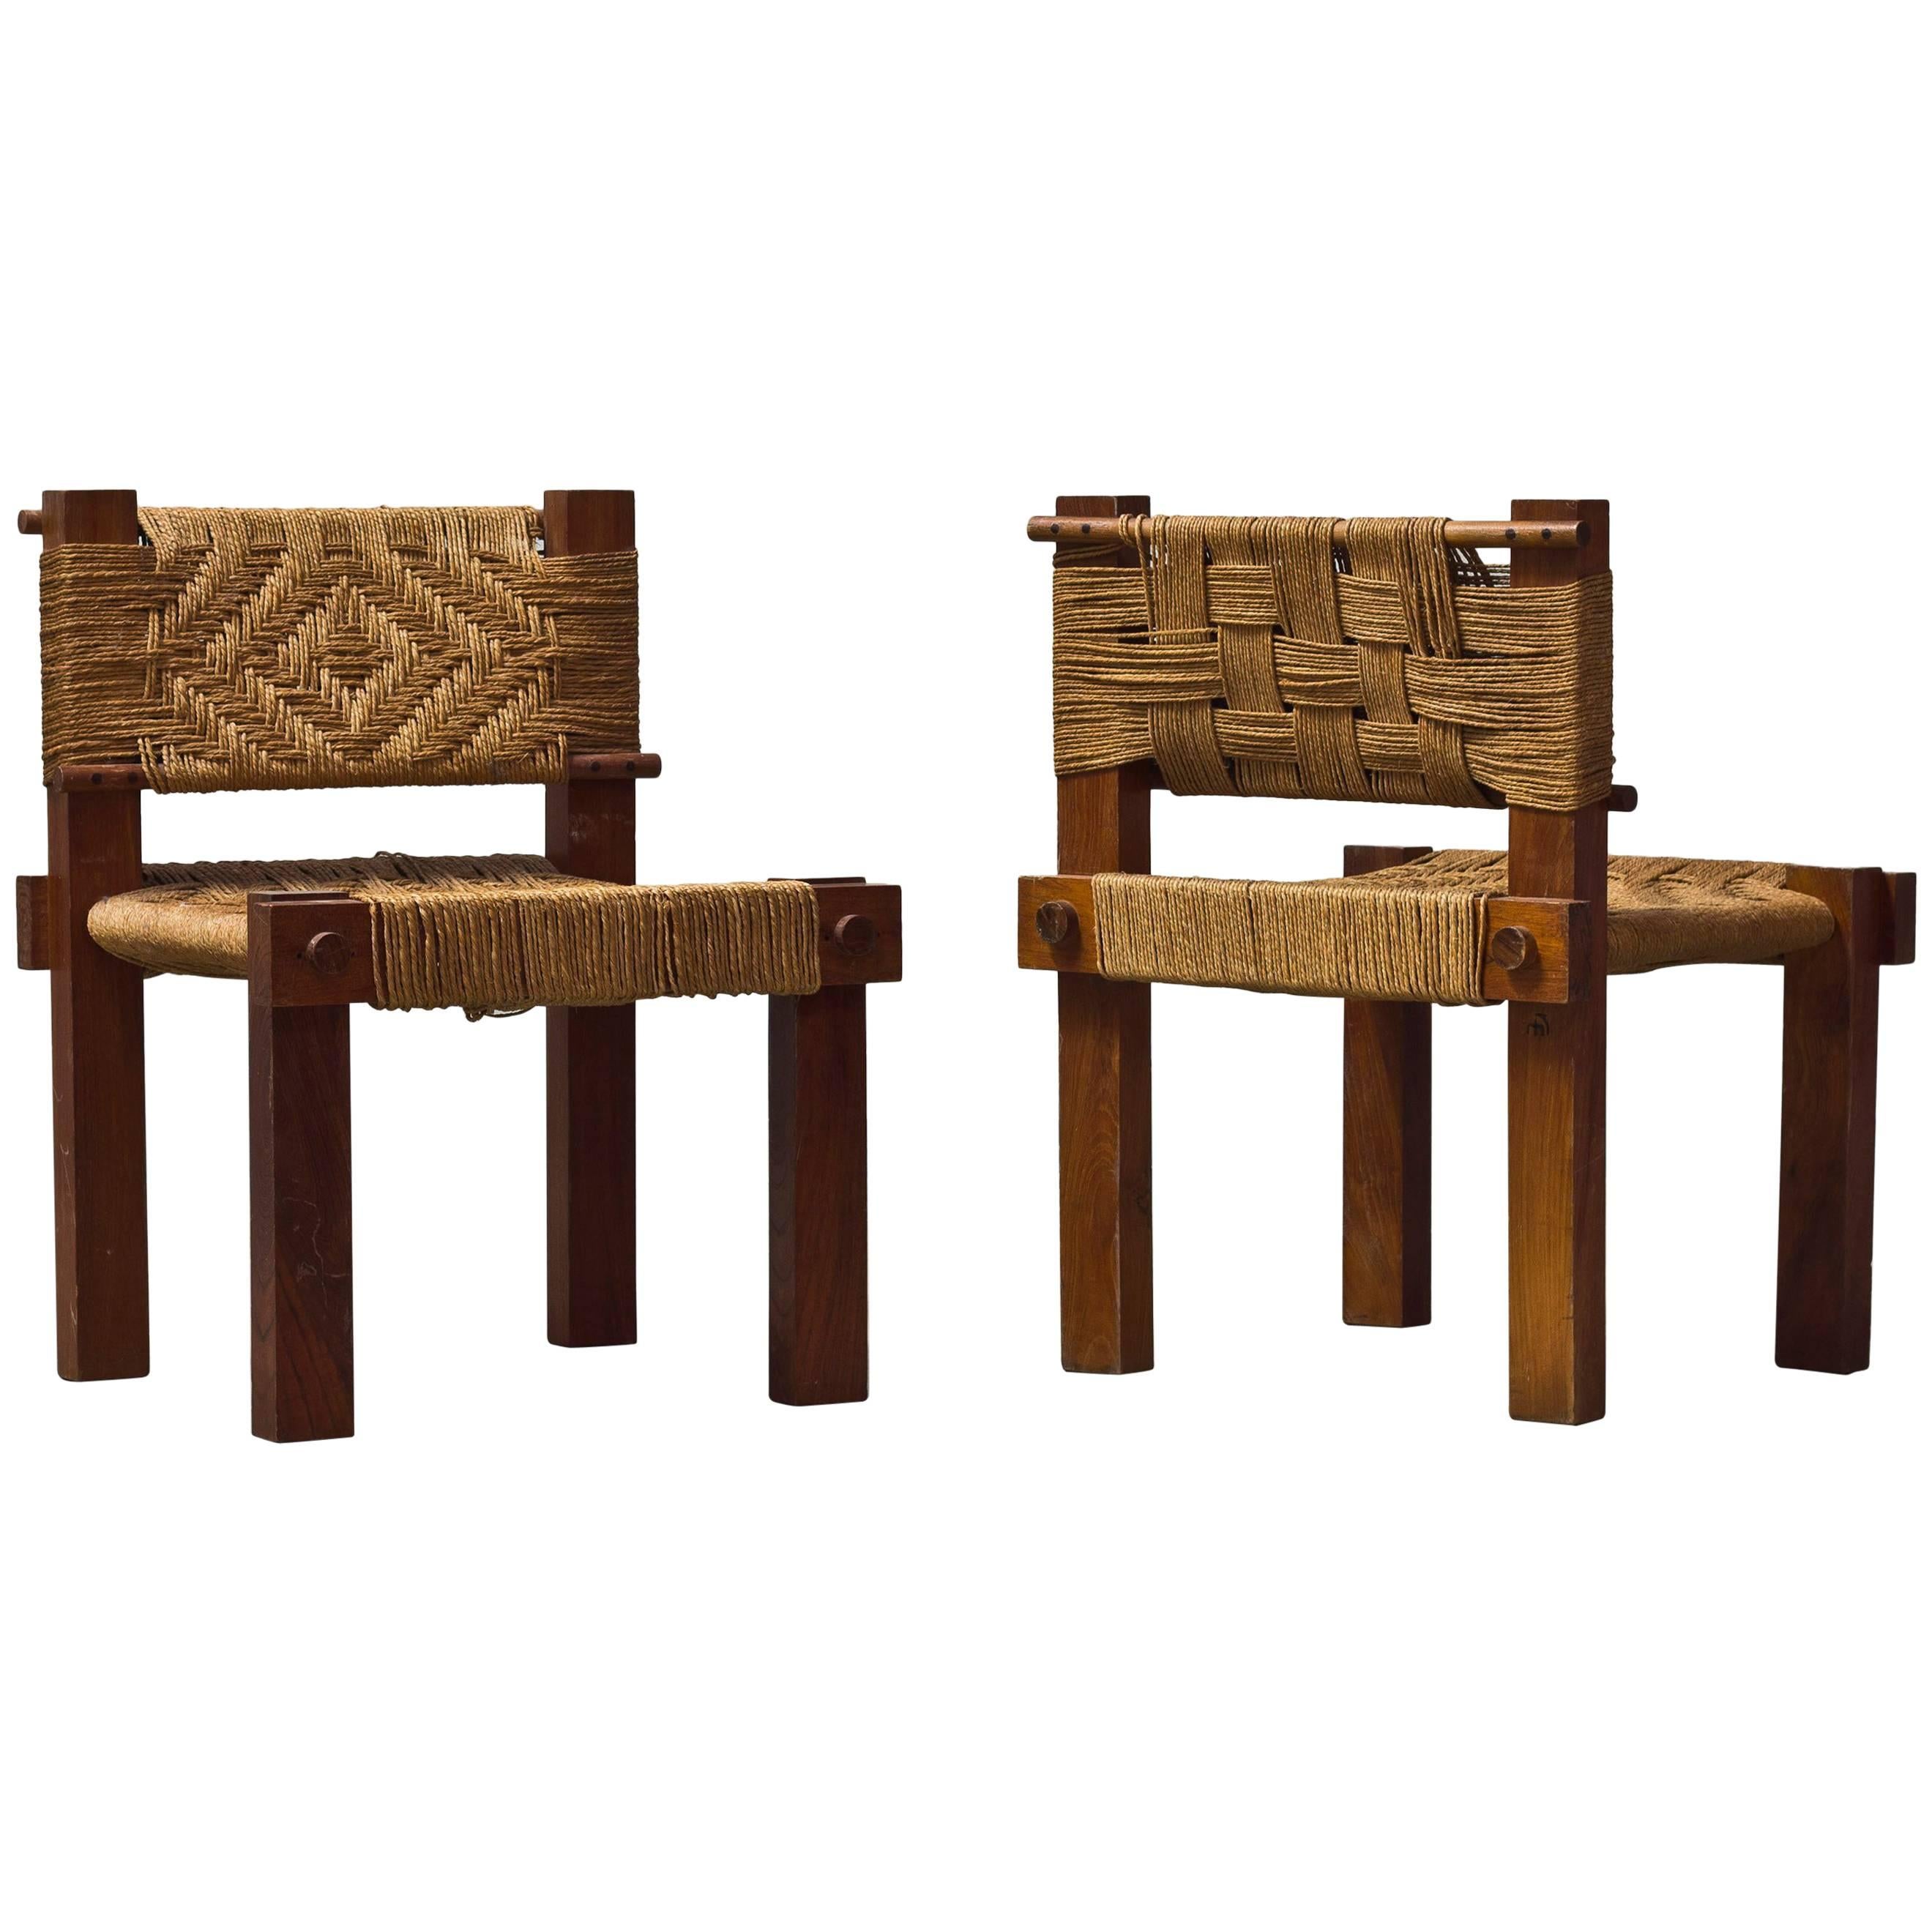 Pair of Wood and Rope Chairs by Adoux and Minet For Sale